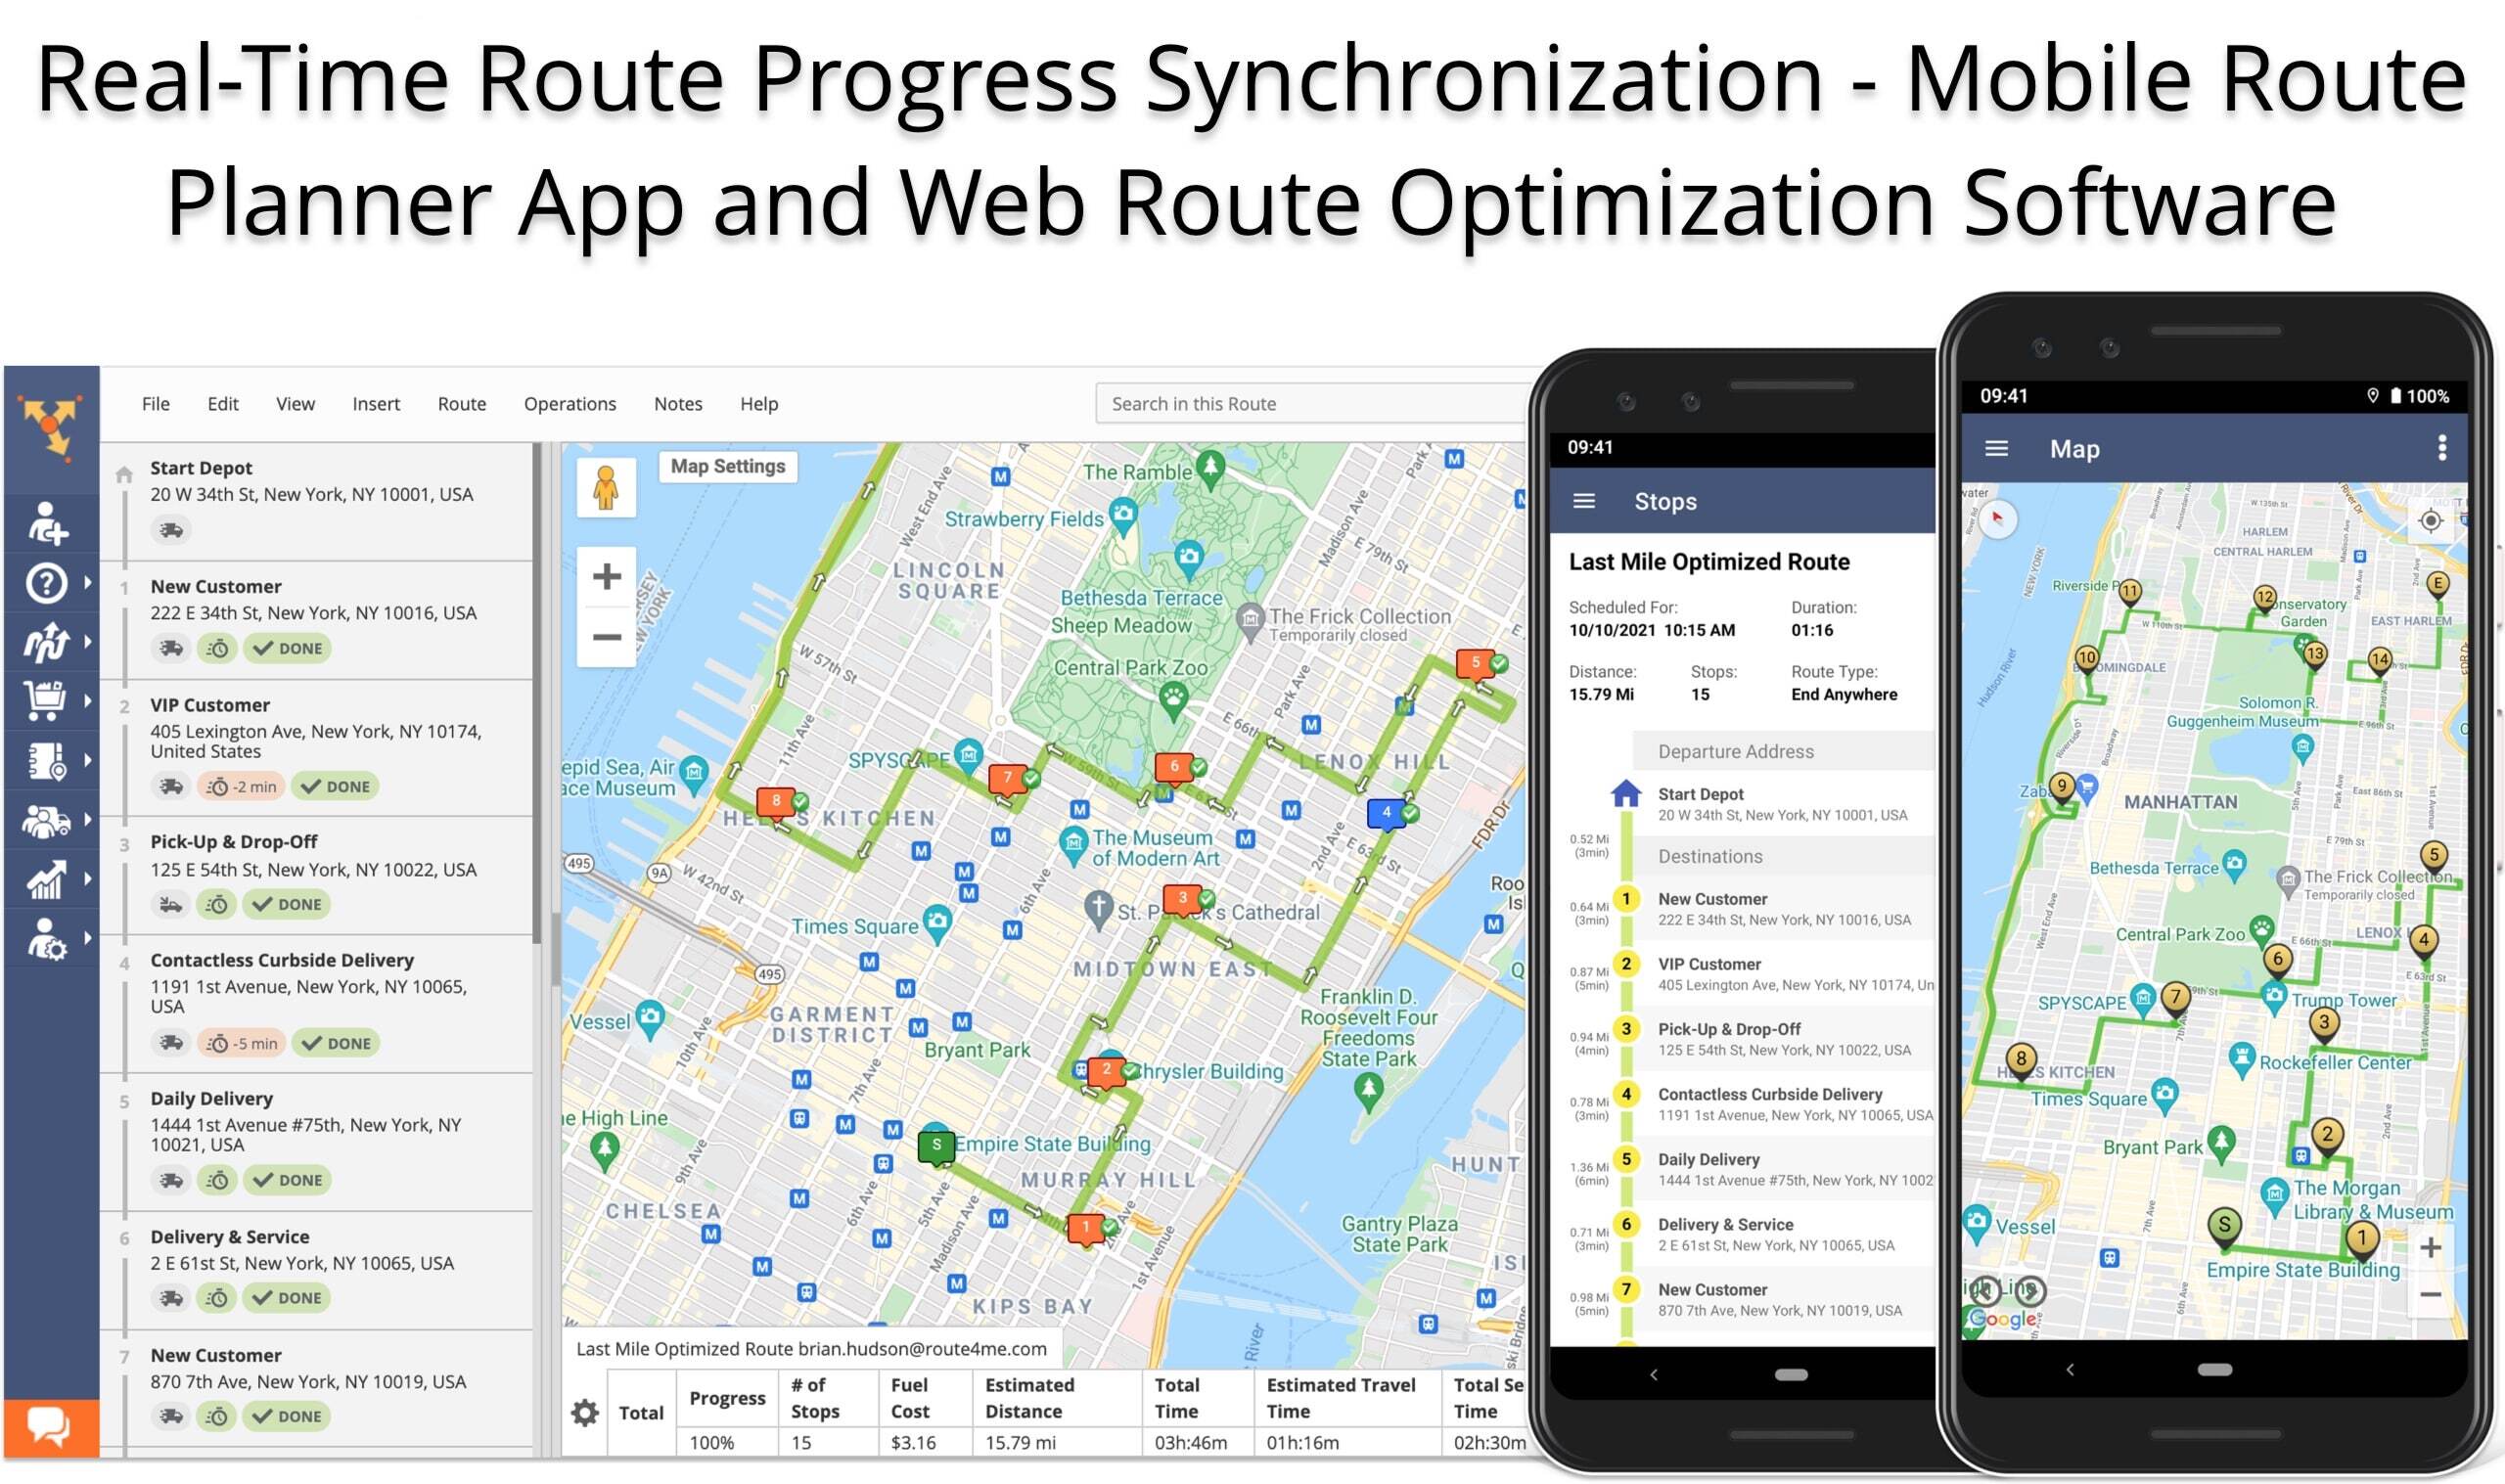 Live driver tracking and GPS tracking history data sync from Route4Me's Route Planning Web Platform to drivers' Android Route Planner and iOS Route Planner apps.